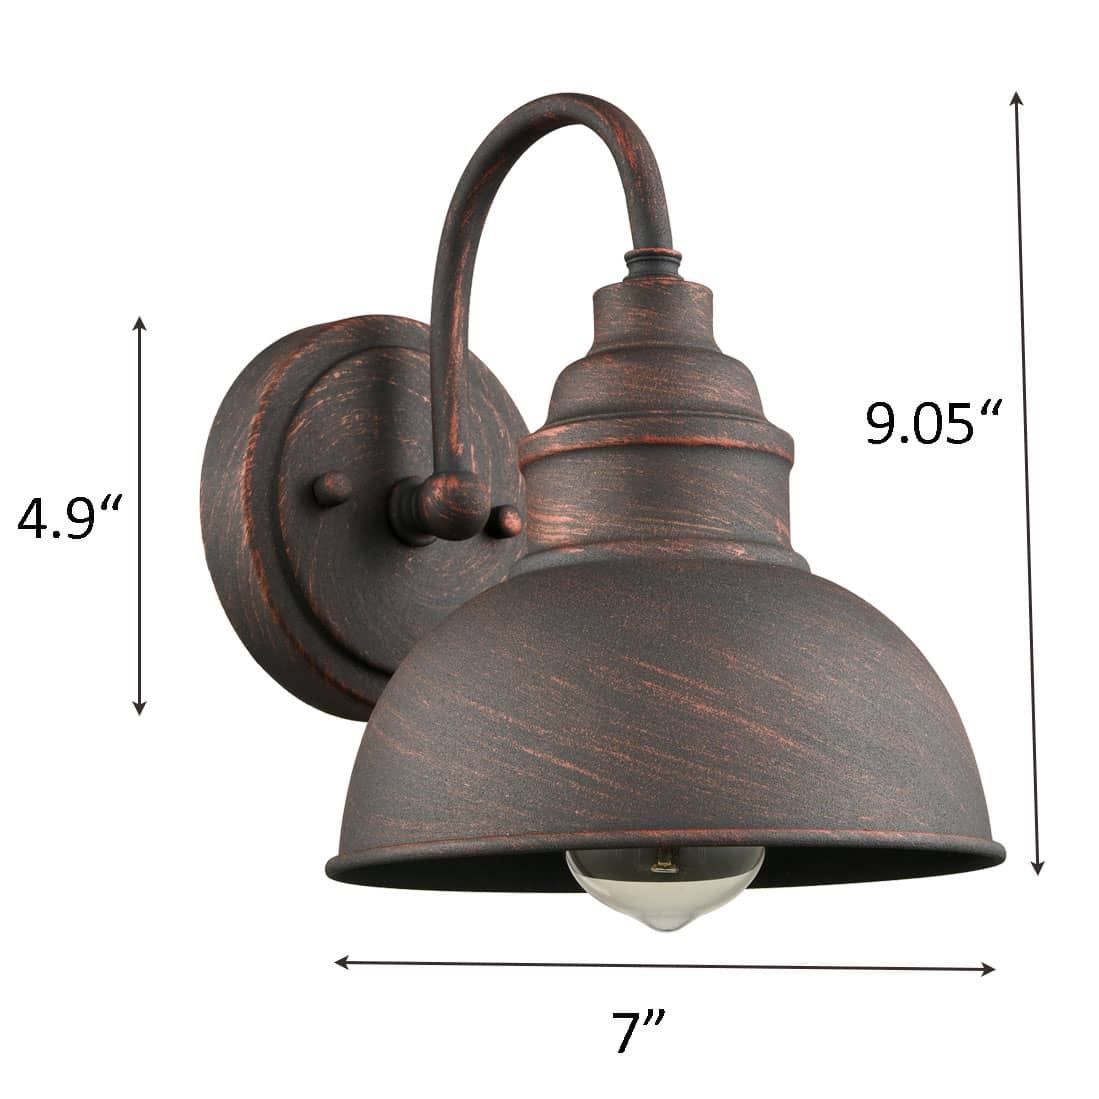 2-Pack Farmhouse Indoor/Outdoor Wall Sconce Metal Barn Light